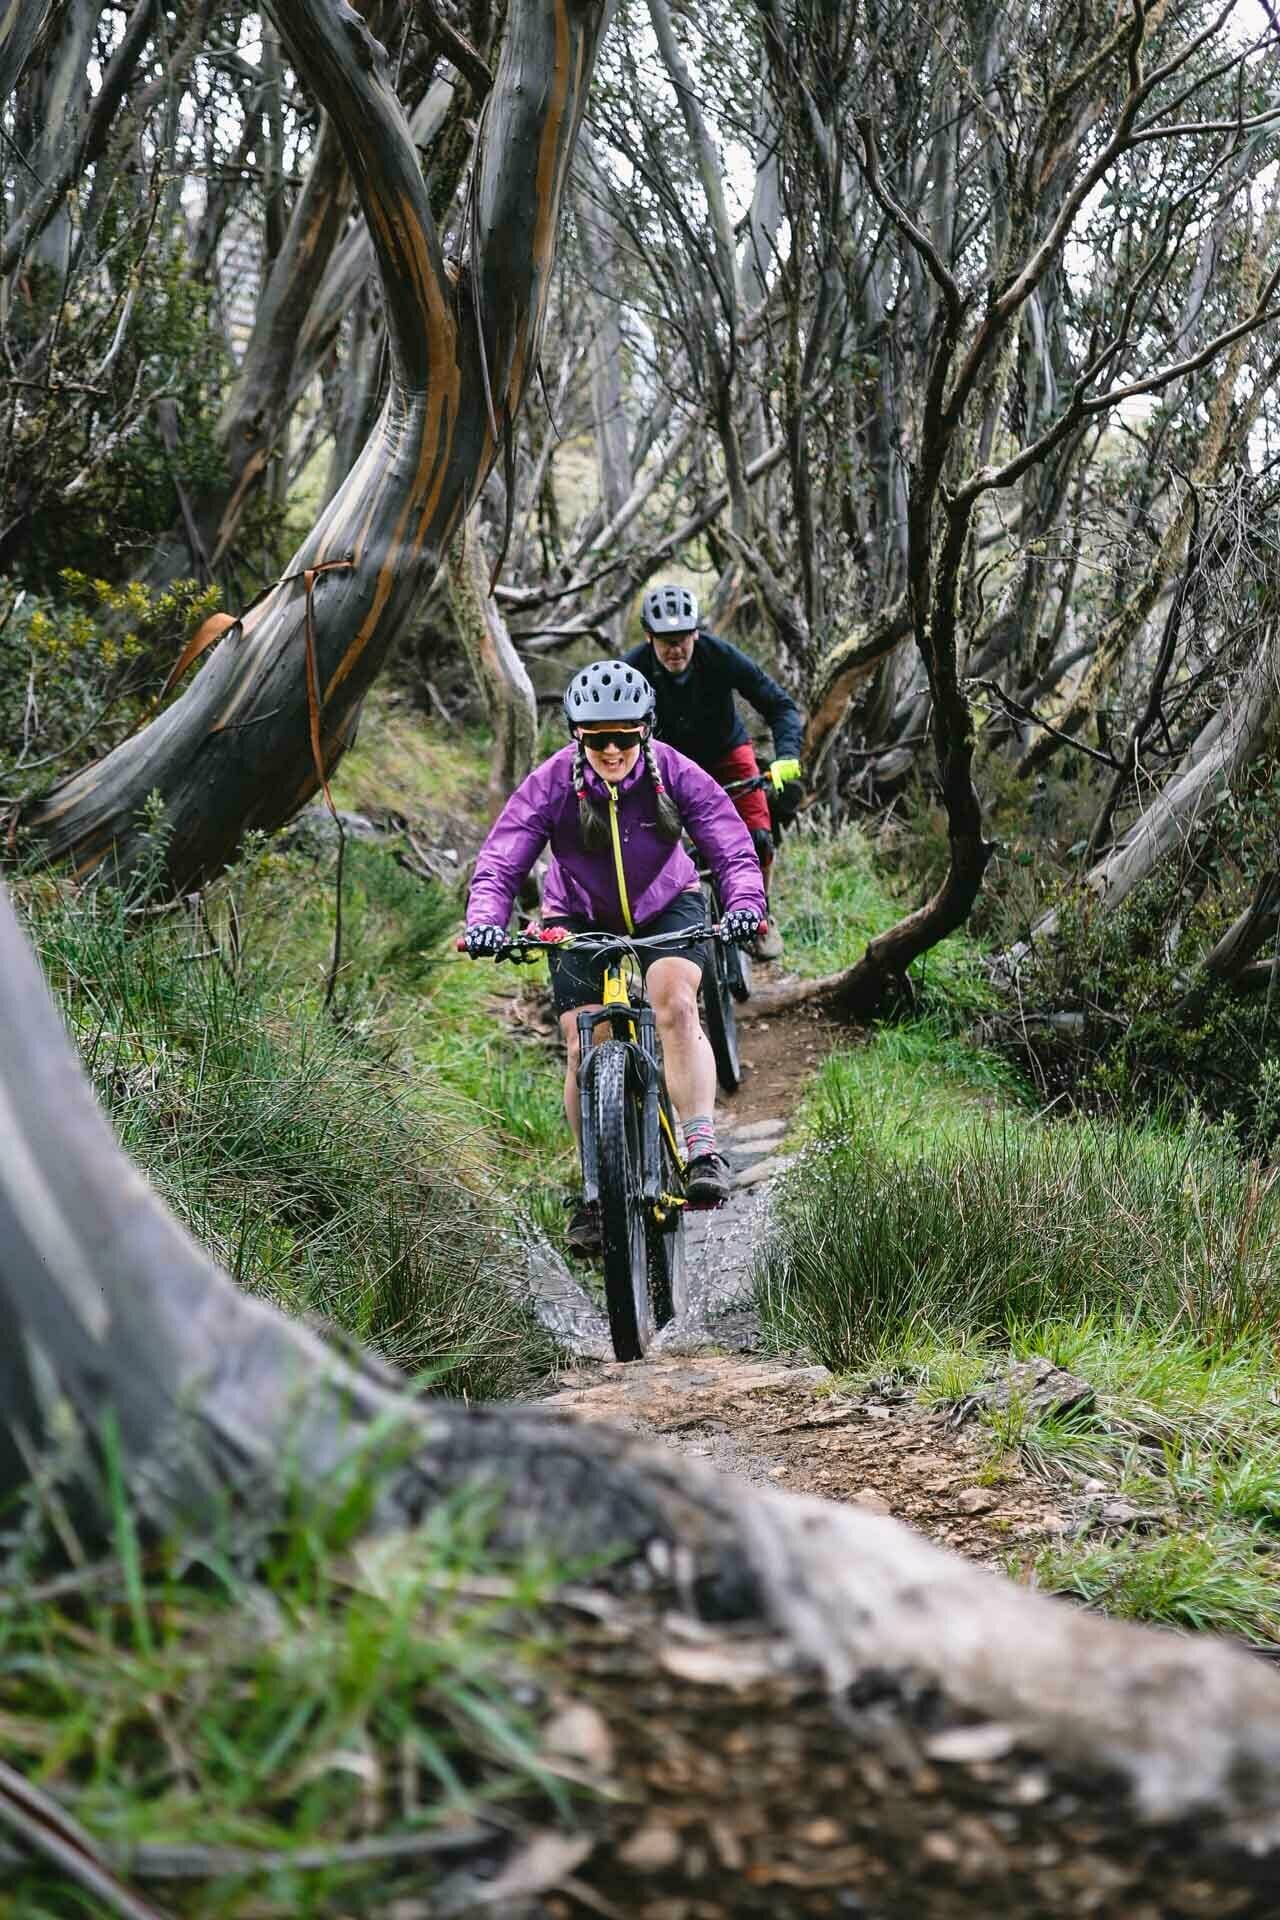 two riders descending, shot by Kale Munro, Tourism North East, Falls Creek, High Country, Victoria, snow gums, mountain bike